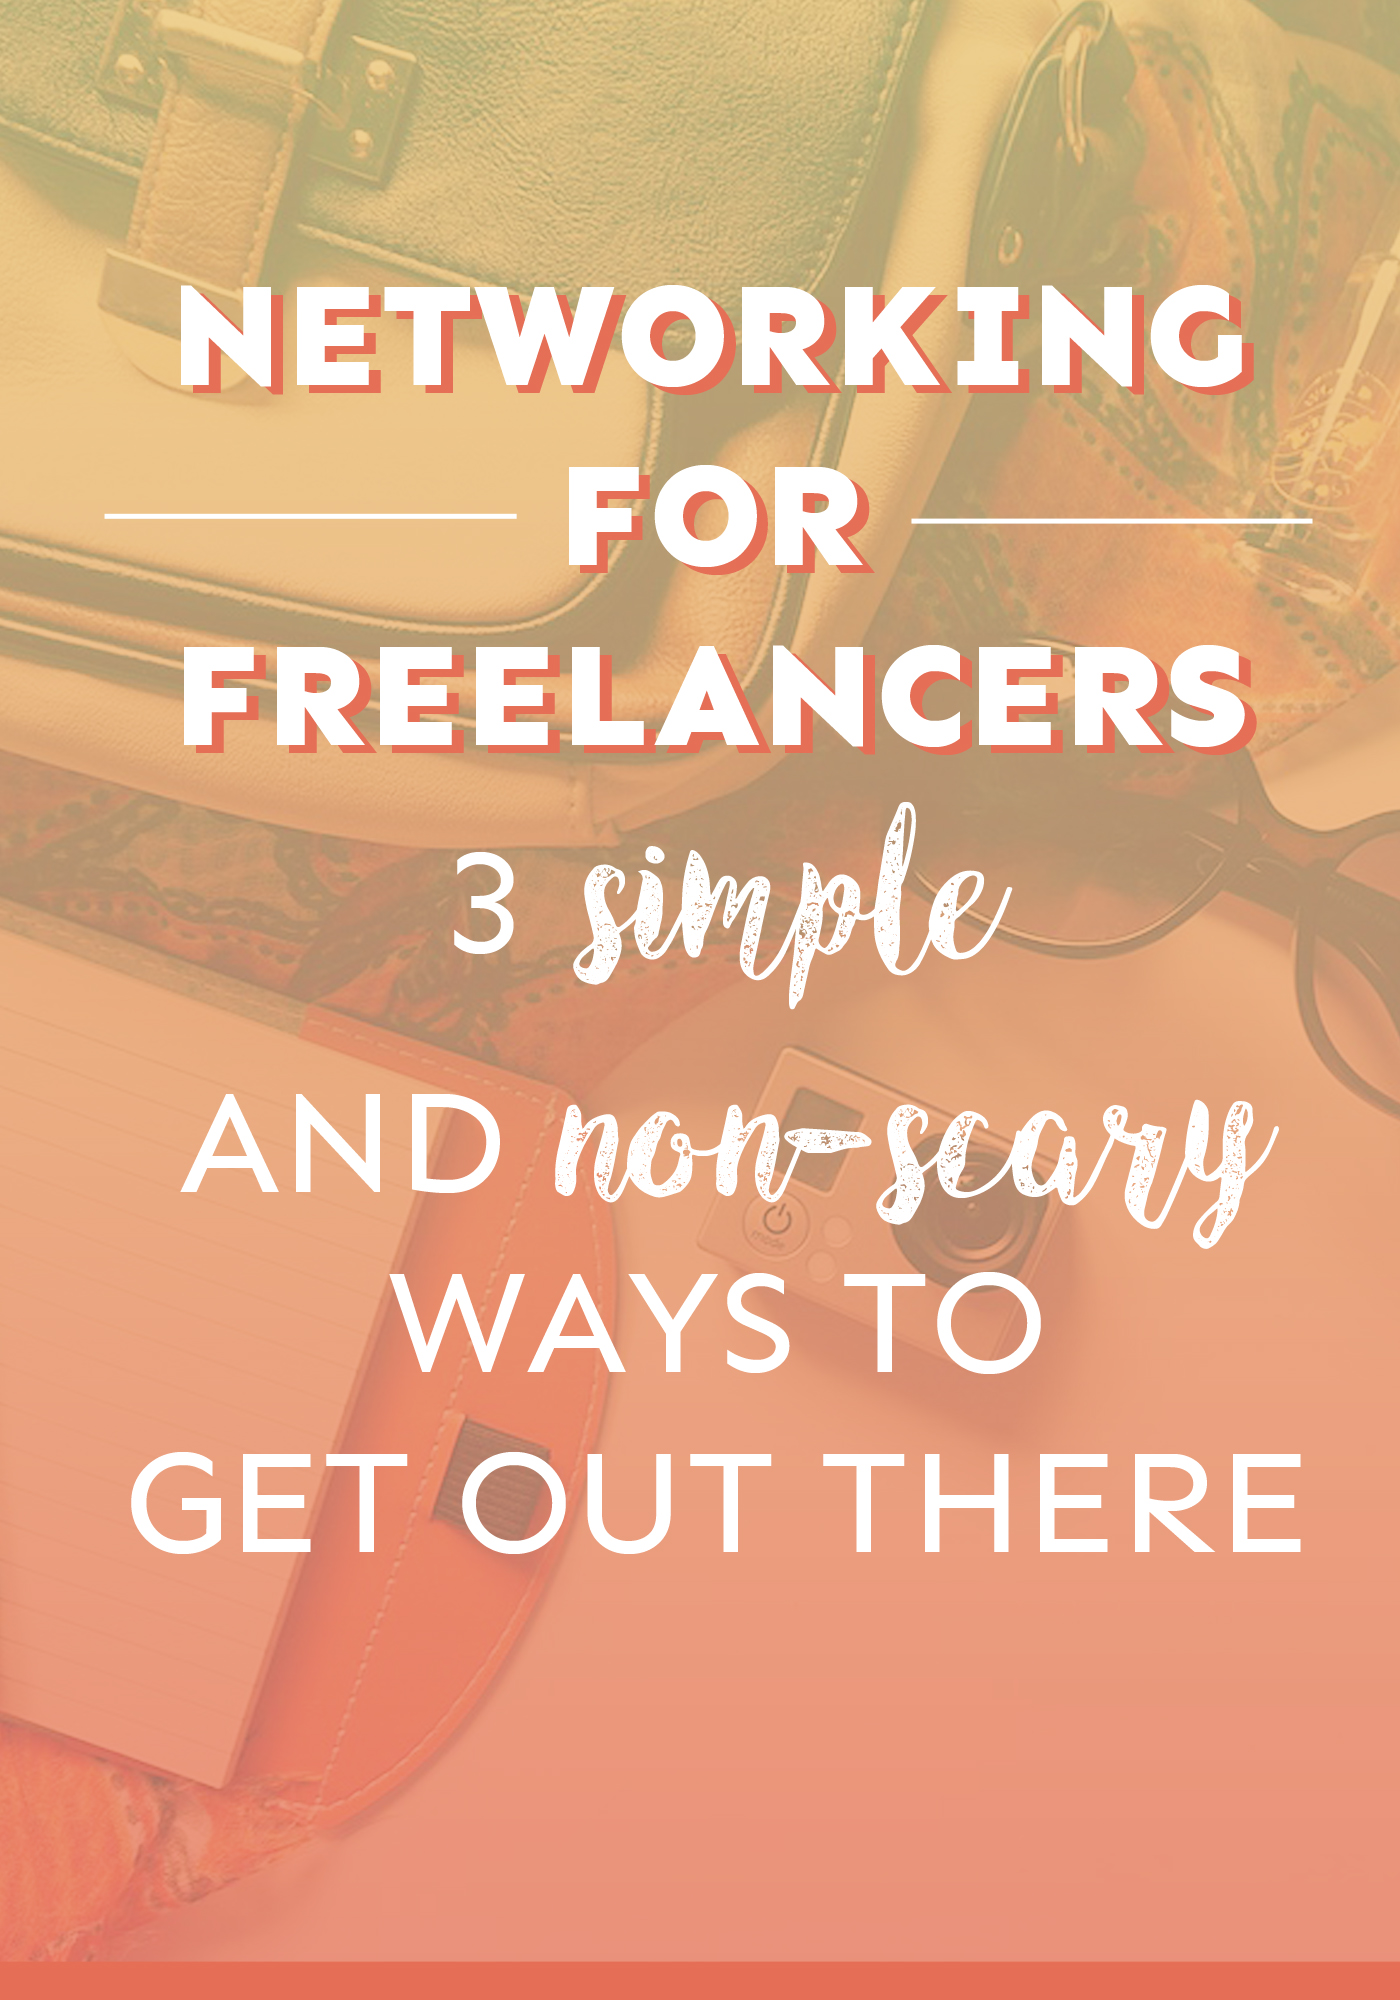 Networking for freelancers is so important, especially when you're just starting out! Here are three simple ways you can put yourself out there in the early days. 